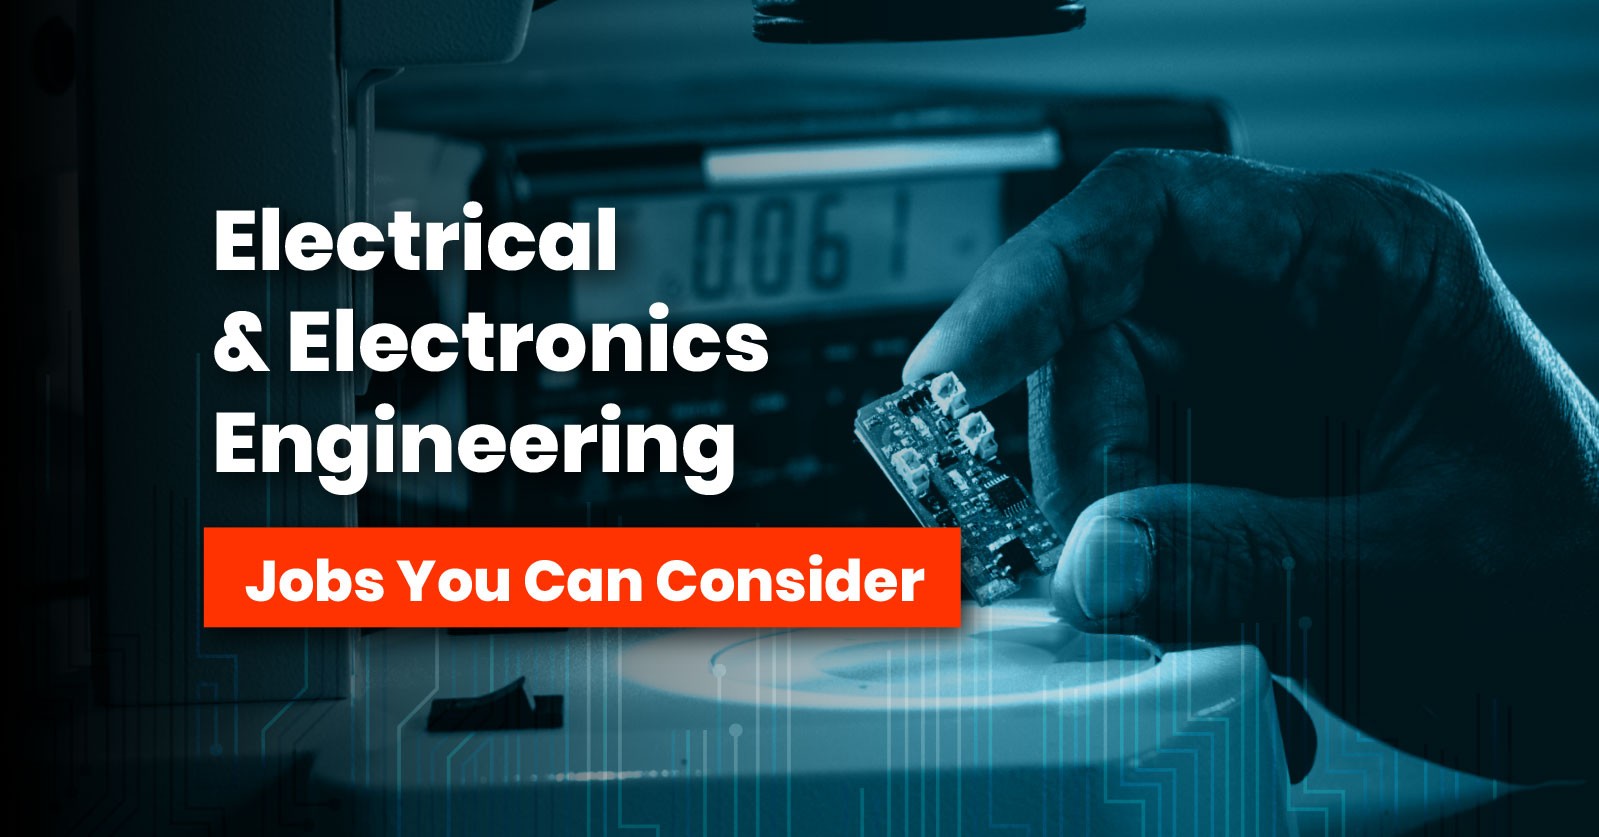 5 Jobs You Can Consider with an Electrical & Electronics Engineering Degree